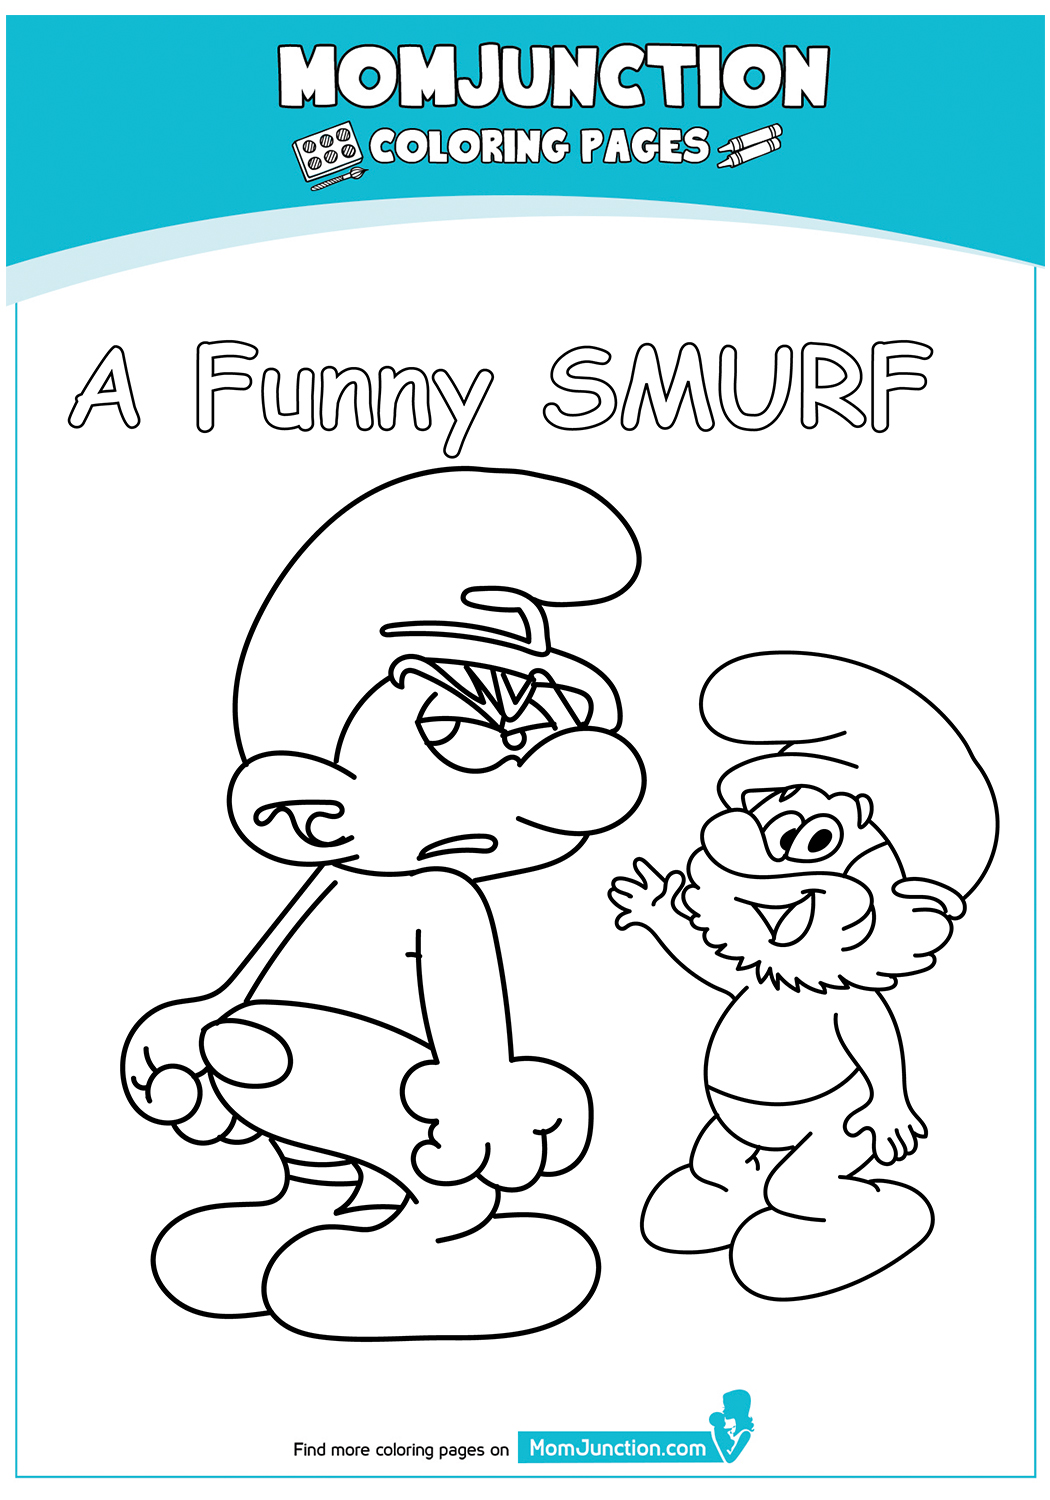 A-Funny-Smurf-Coloring-Grouchy-17